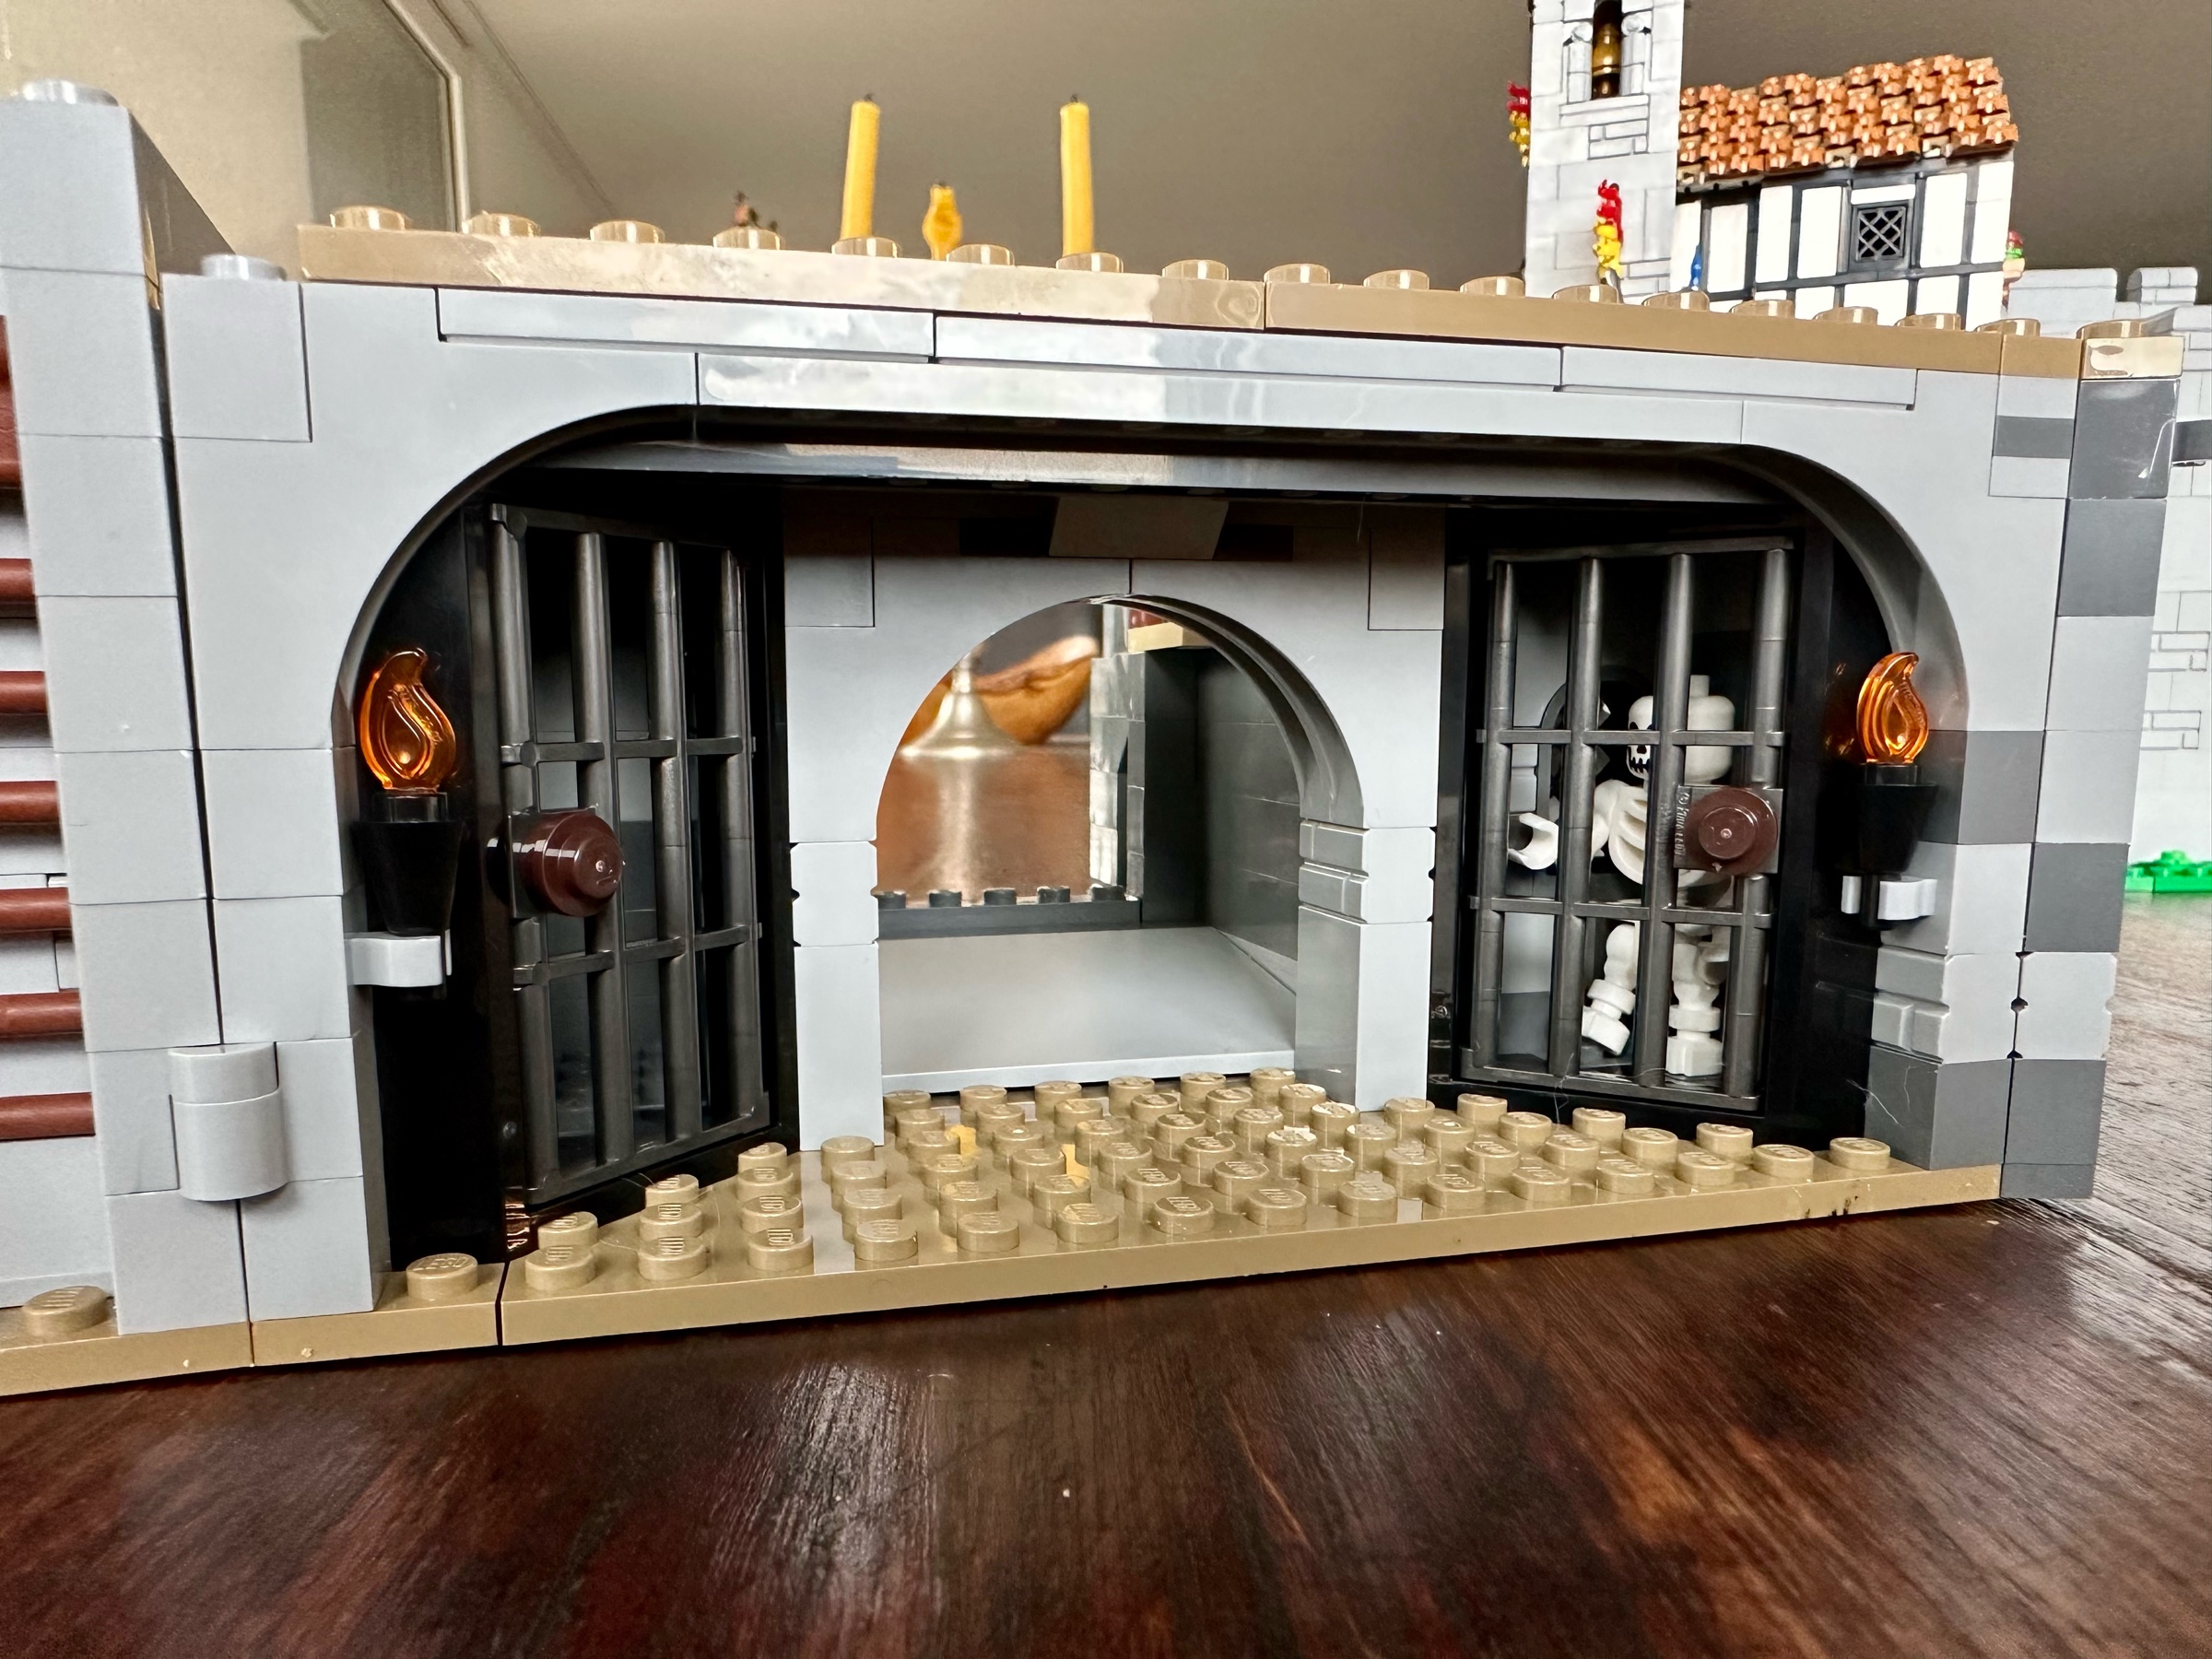 LEGO dungeon with two jail cells. The right cell holds a skeleton.